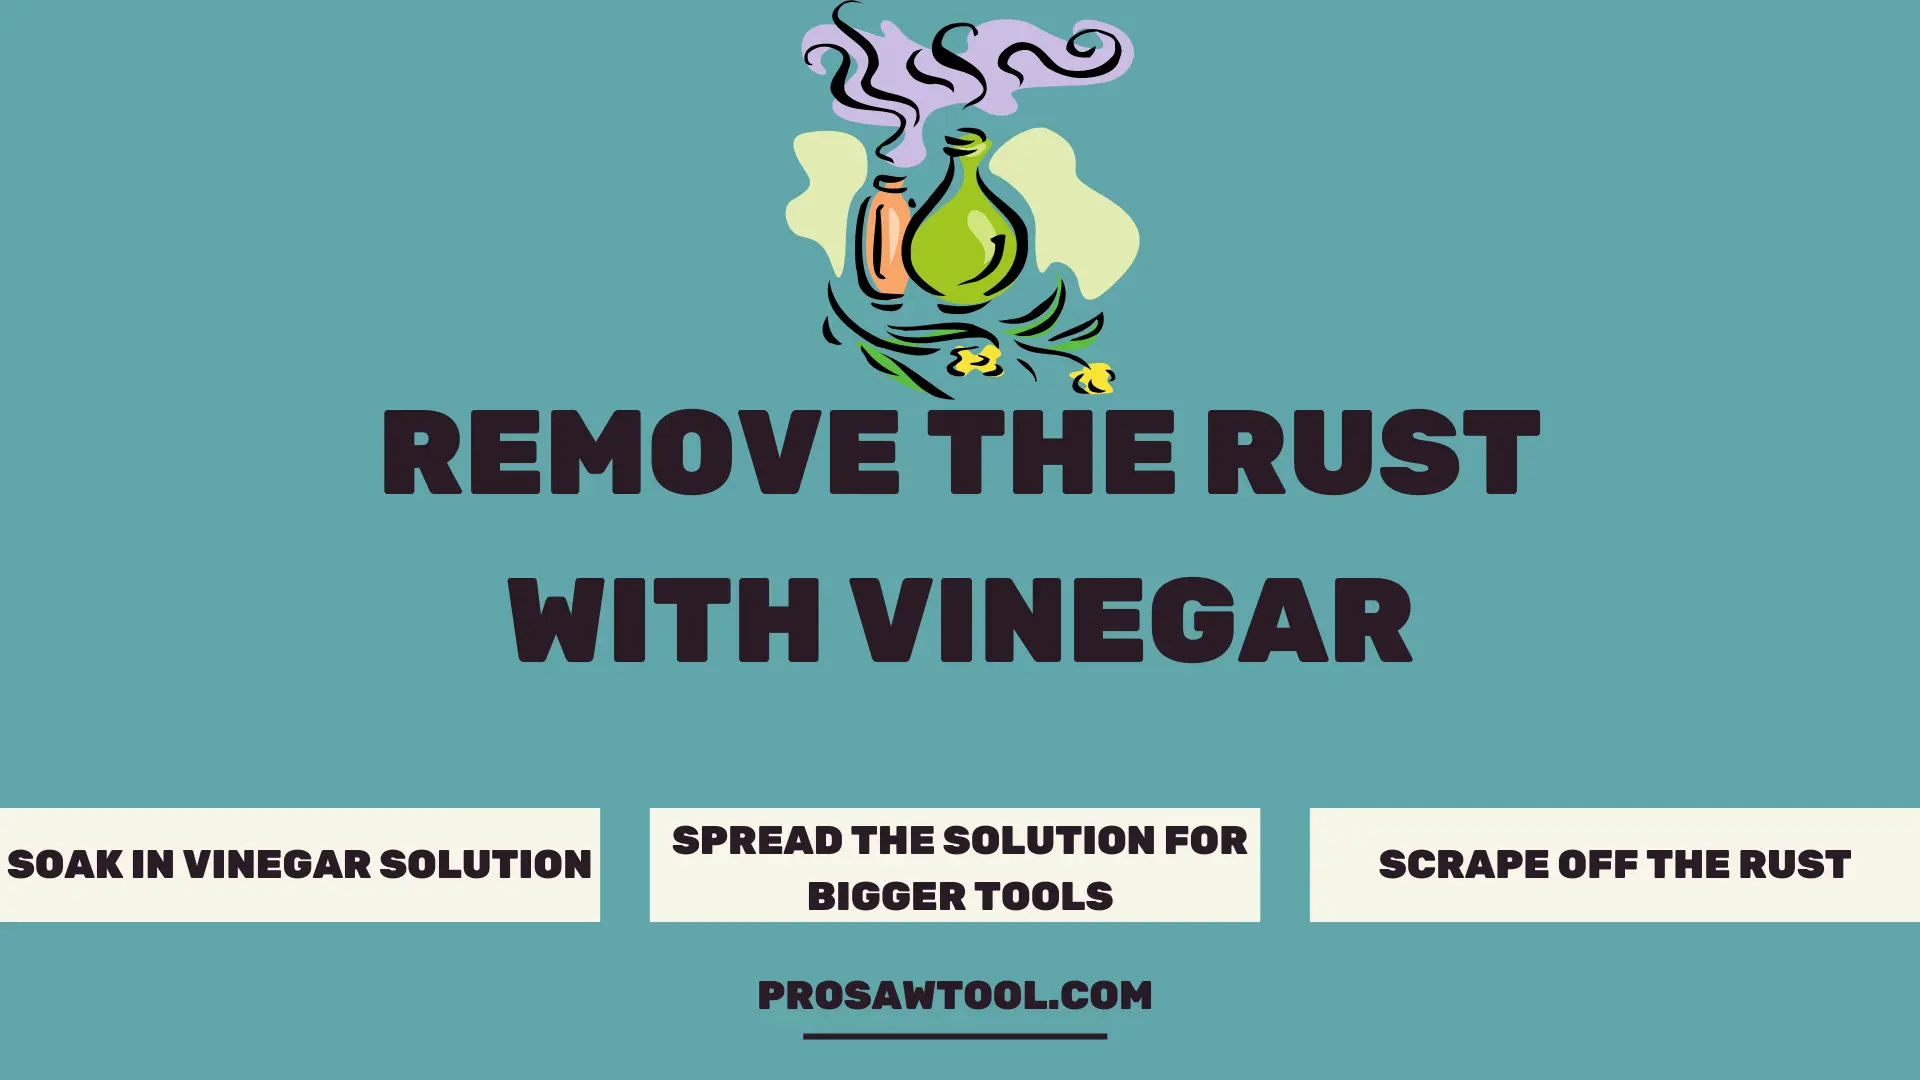 Remove the Rust with vinegar